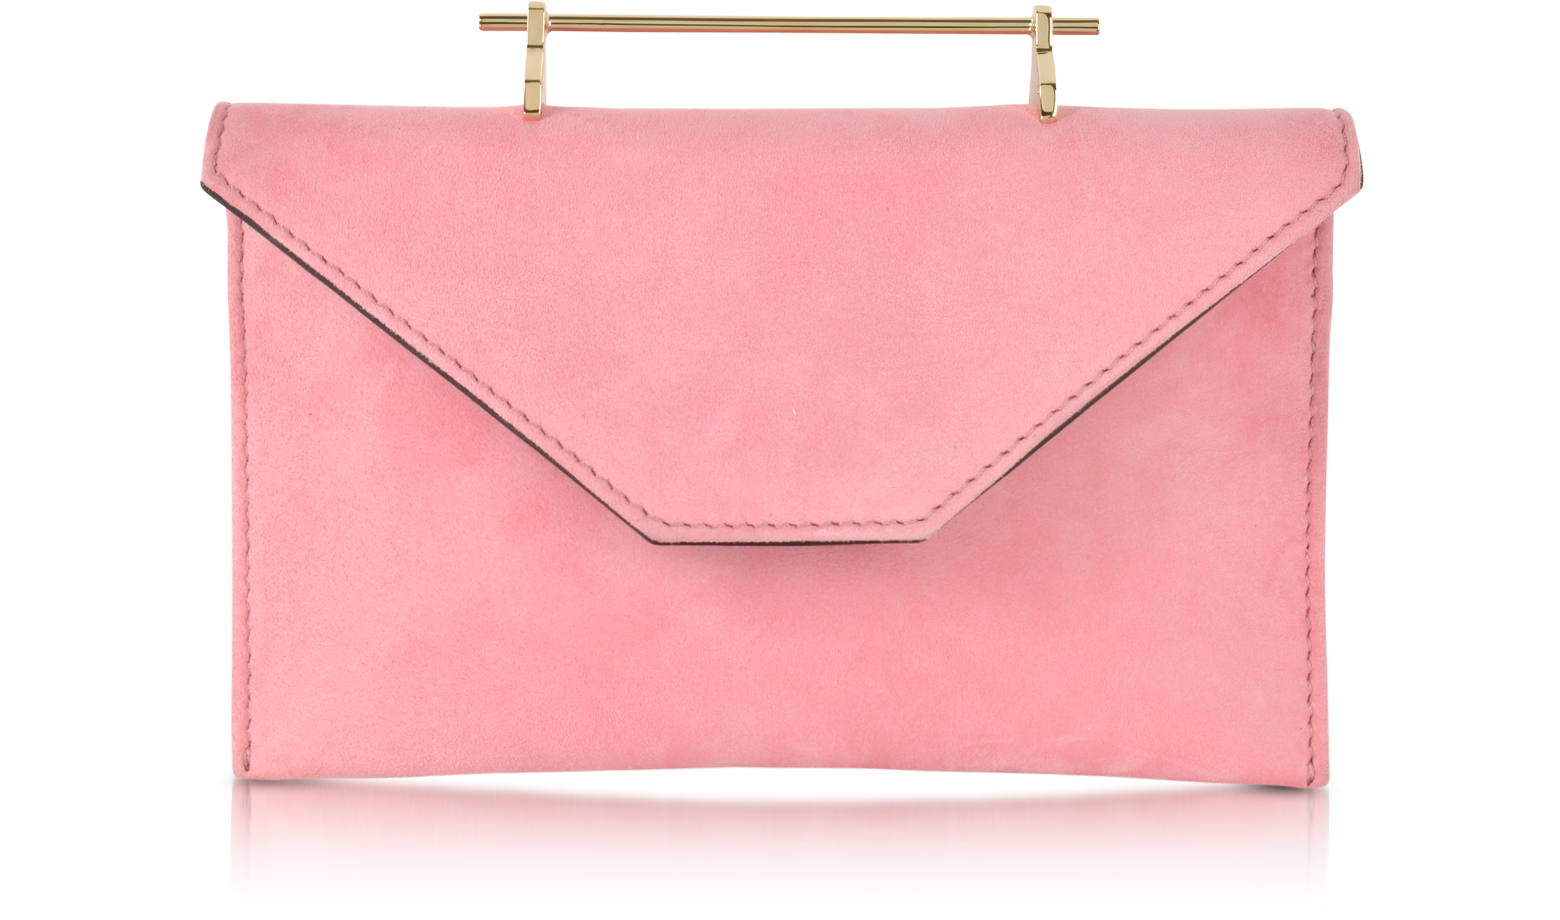 M2Malletier Annabelle Candy Pink Suede Clutch w/Chain at FORZIERI